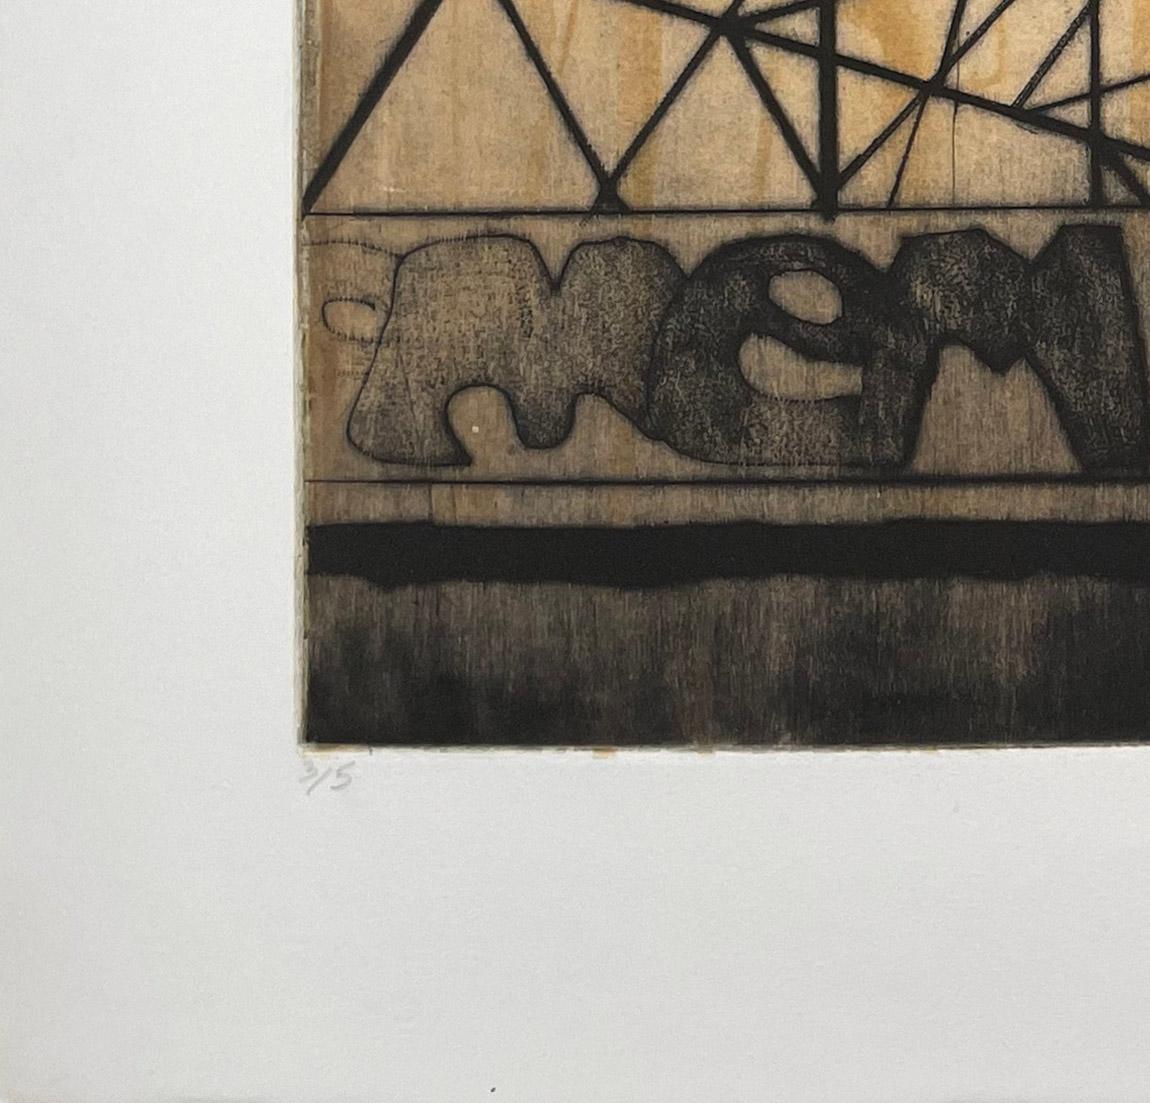 Drypoint and monotype, signed and numbered by the artist.

Robinson has been honored as the recipient of the Mario Avati Gravure Laureate Award from the Academie des Beaux Arts in Paris. The award includes a solo Exhibition at the Pavillon Comtesse